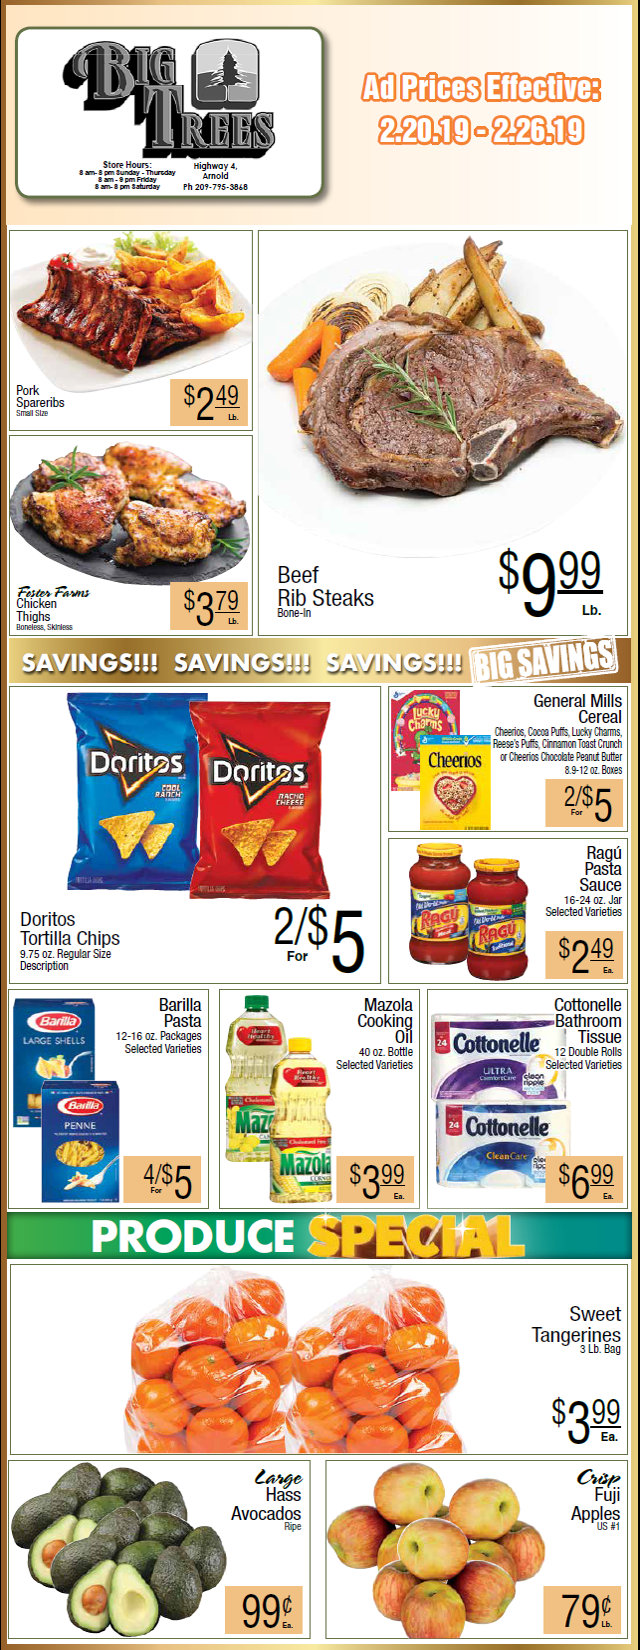 Big Trees Market Weekly Ad & Grocery Specials Through February 26th